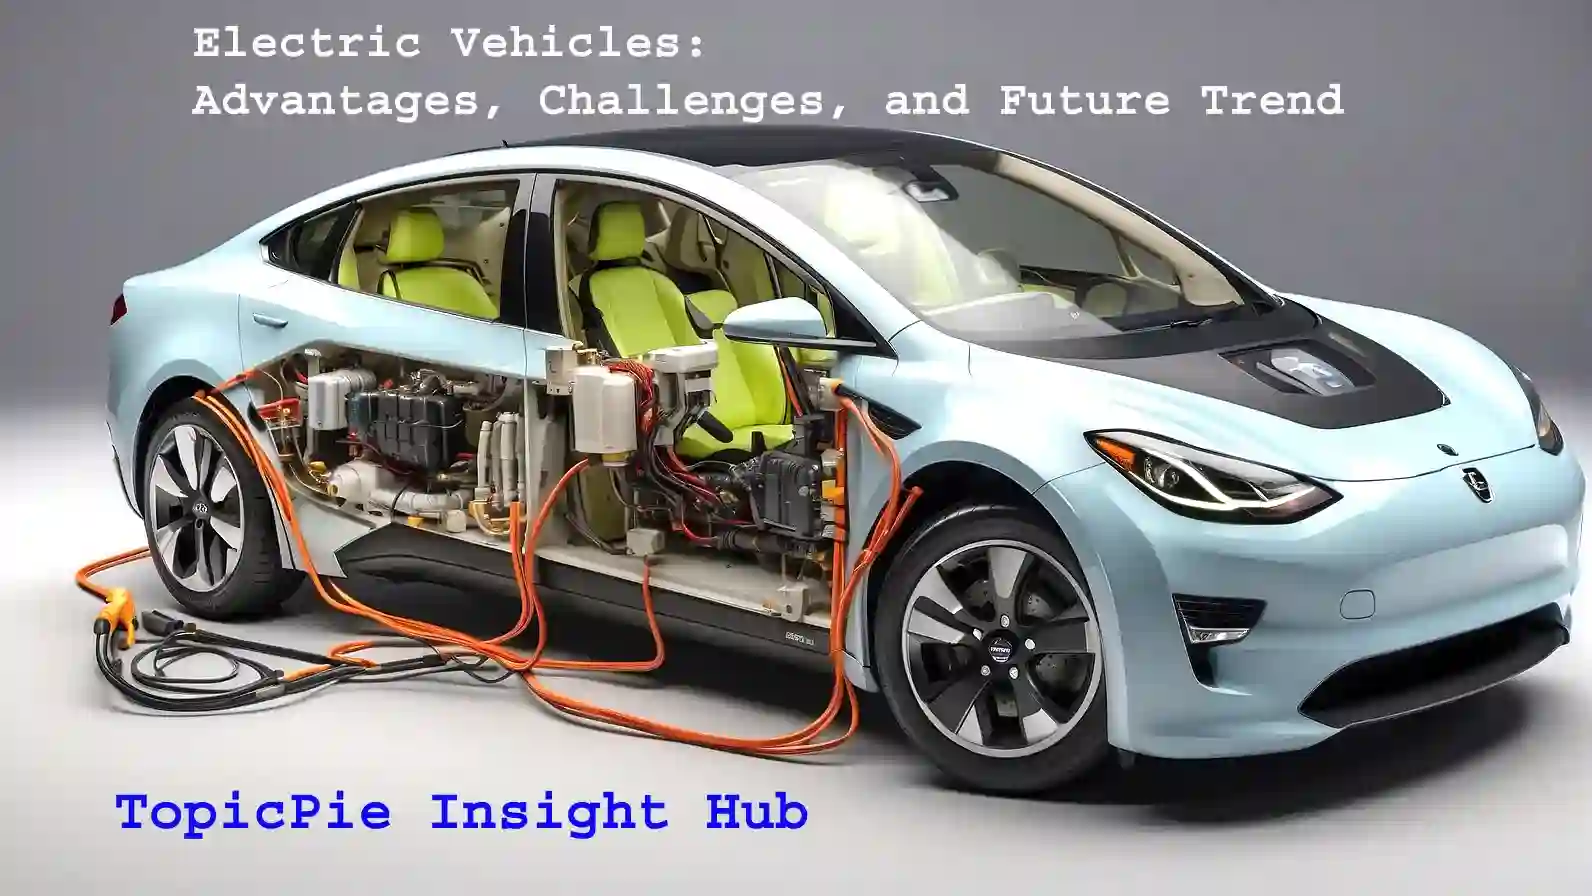 Electric Vehicles Advantages, Challenges, and Future Trend